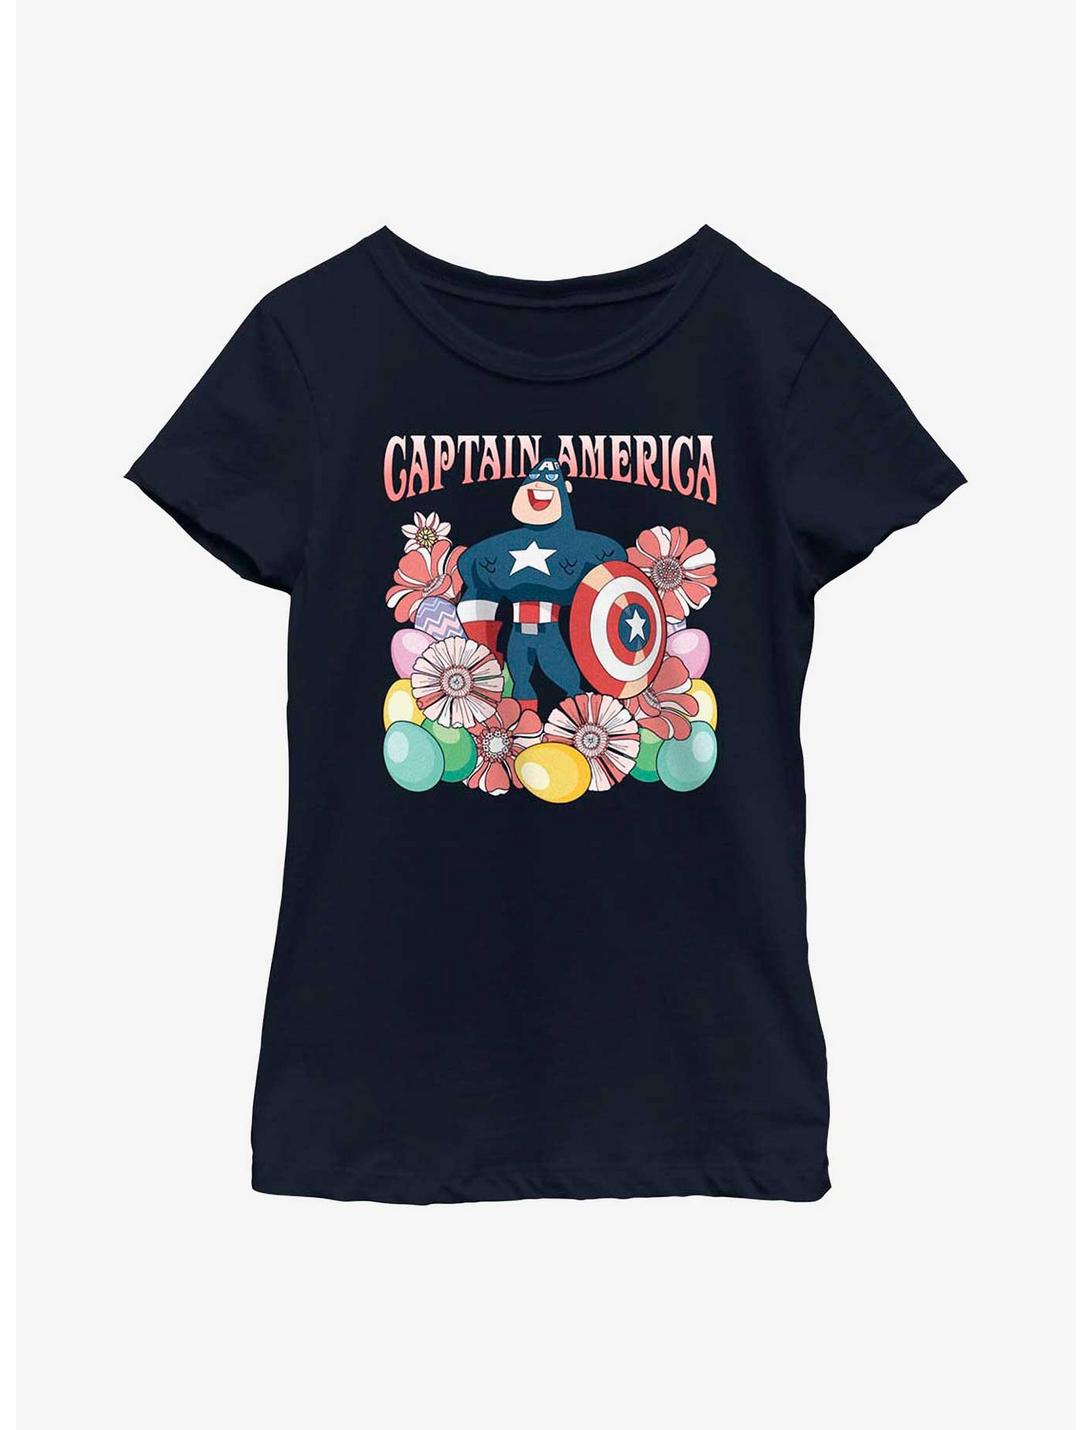 Marvel Captain America Collecting Eggs Youth Girls T-Shirt, NAVY, hi-res